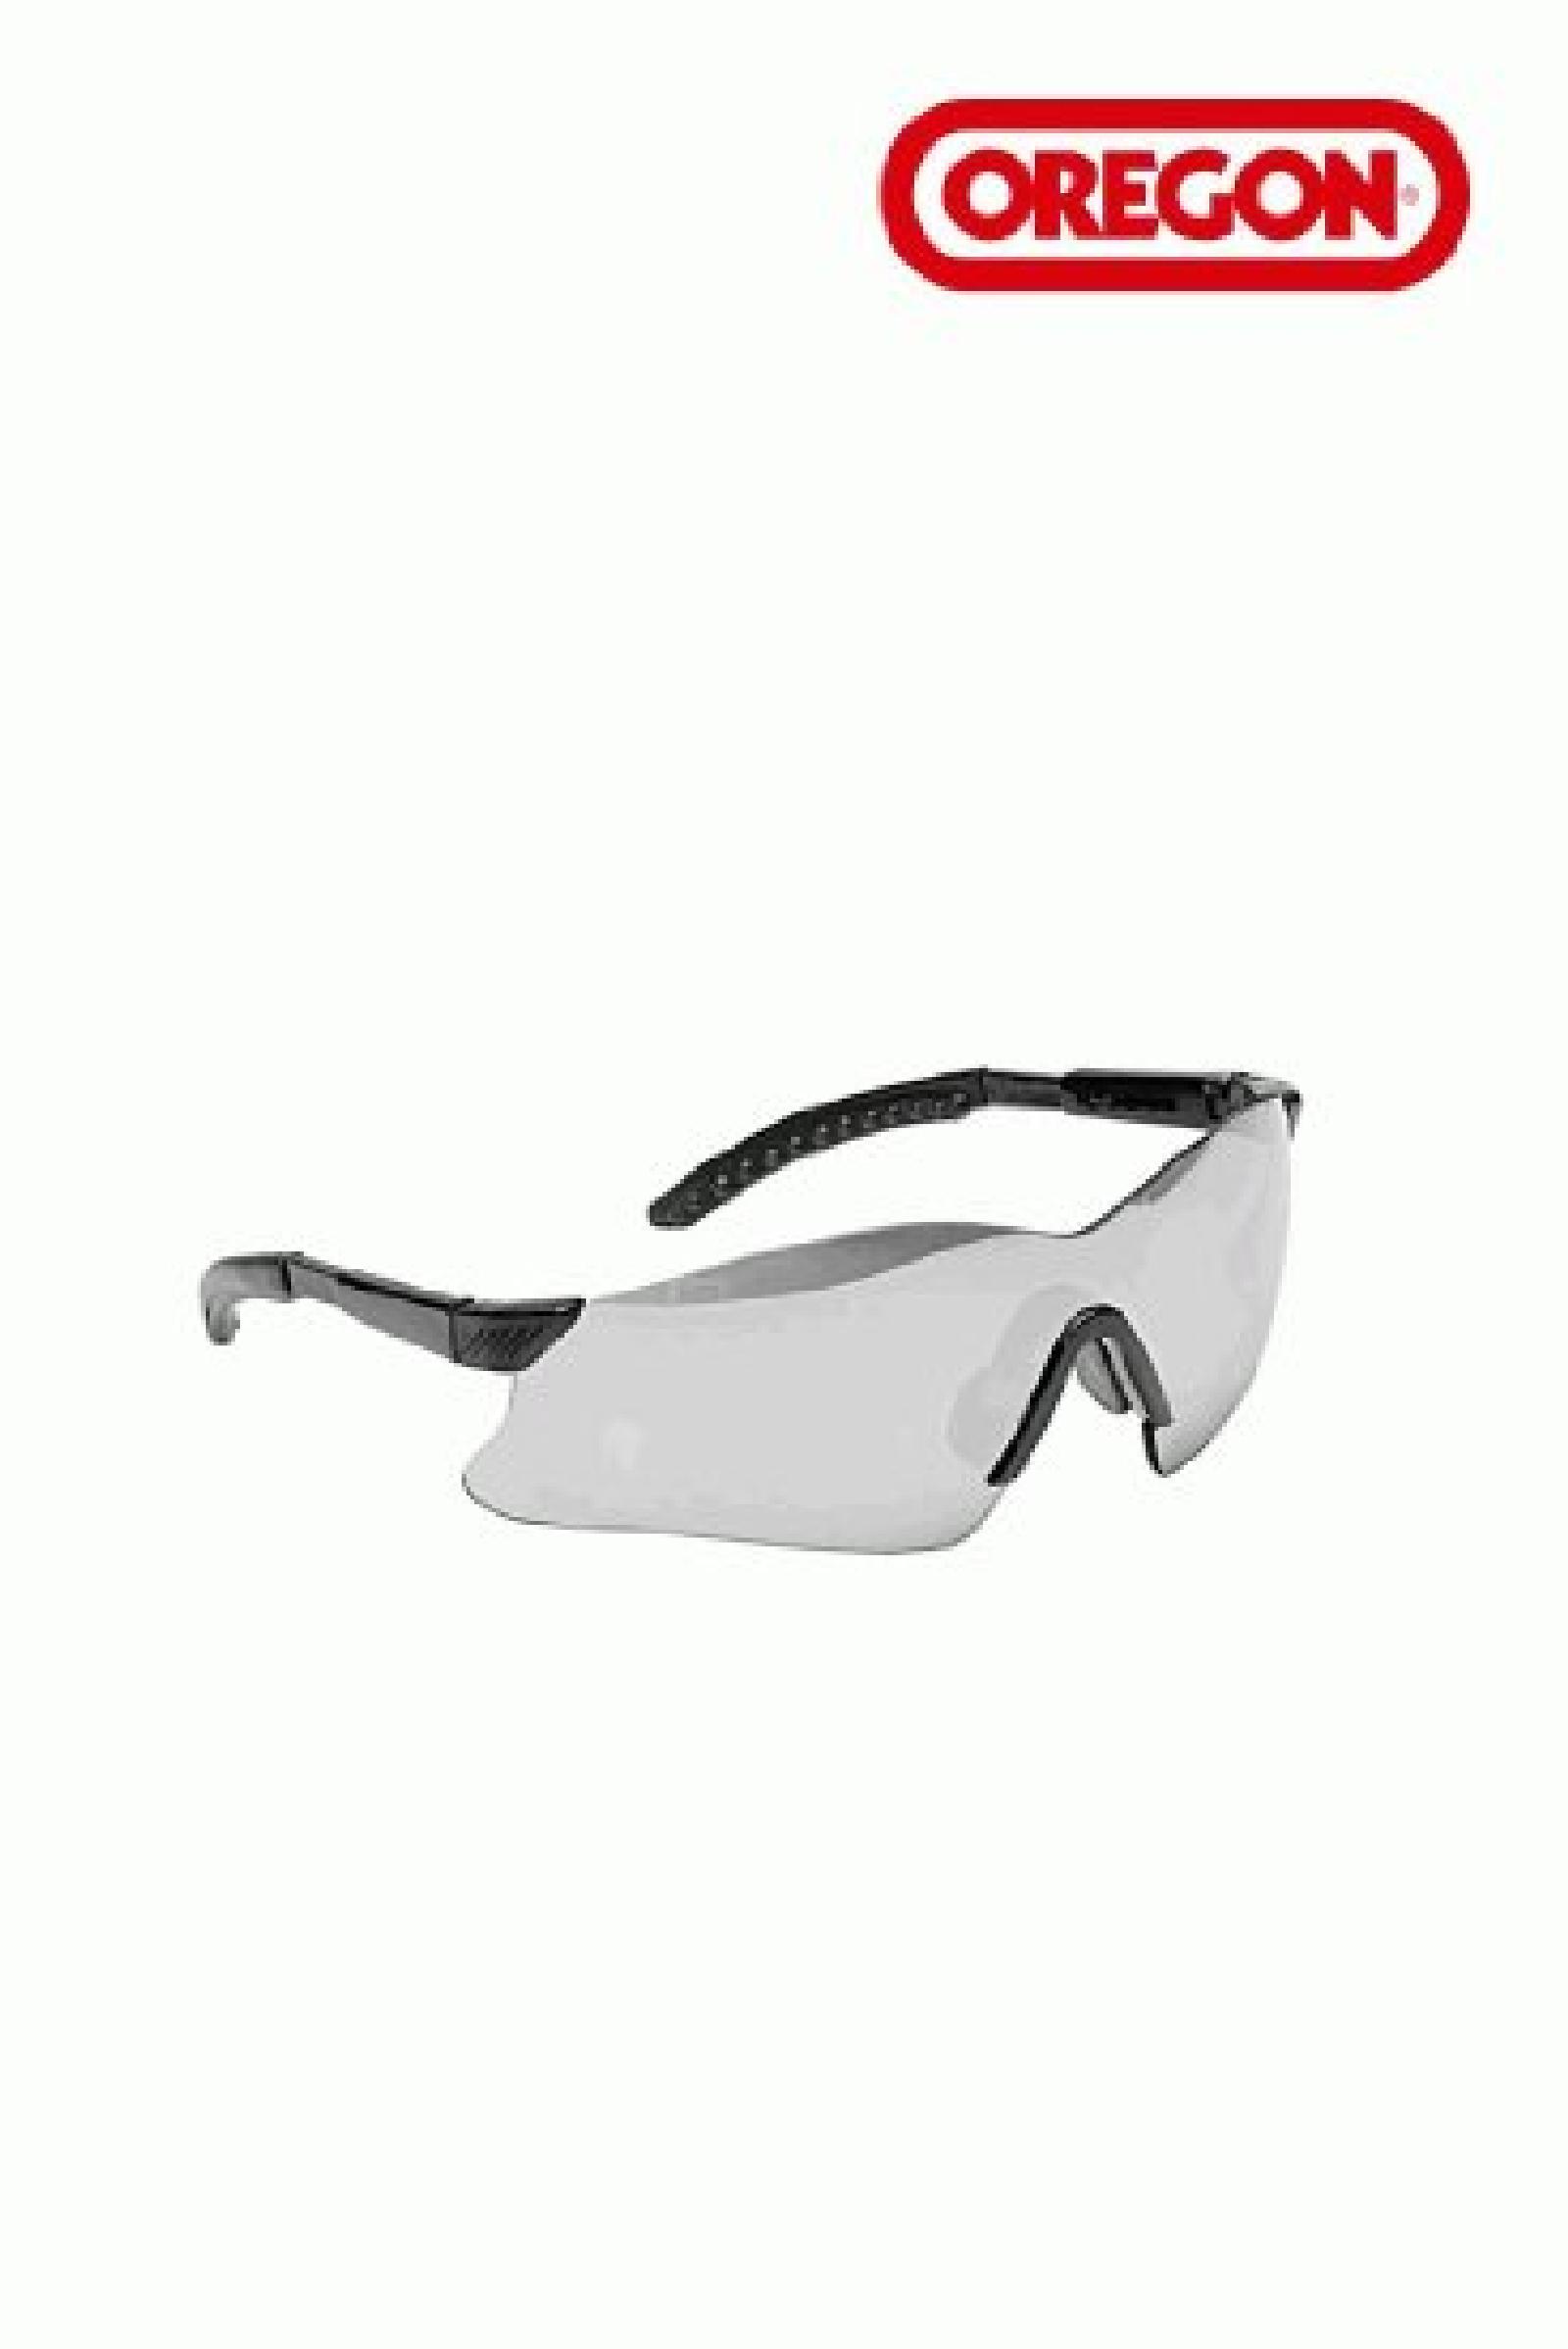 PROTECTIVE EYEWEAR SILVER part# 42-134 by Oregon